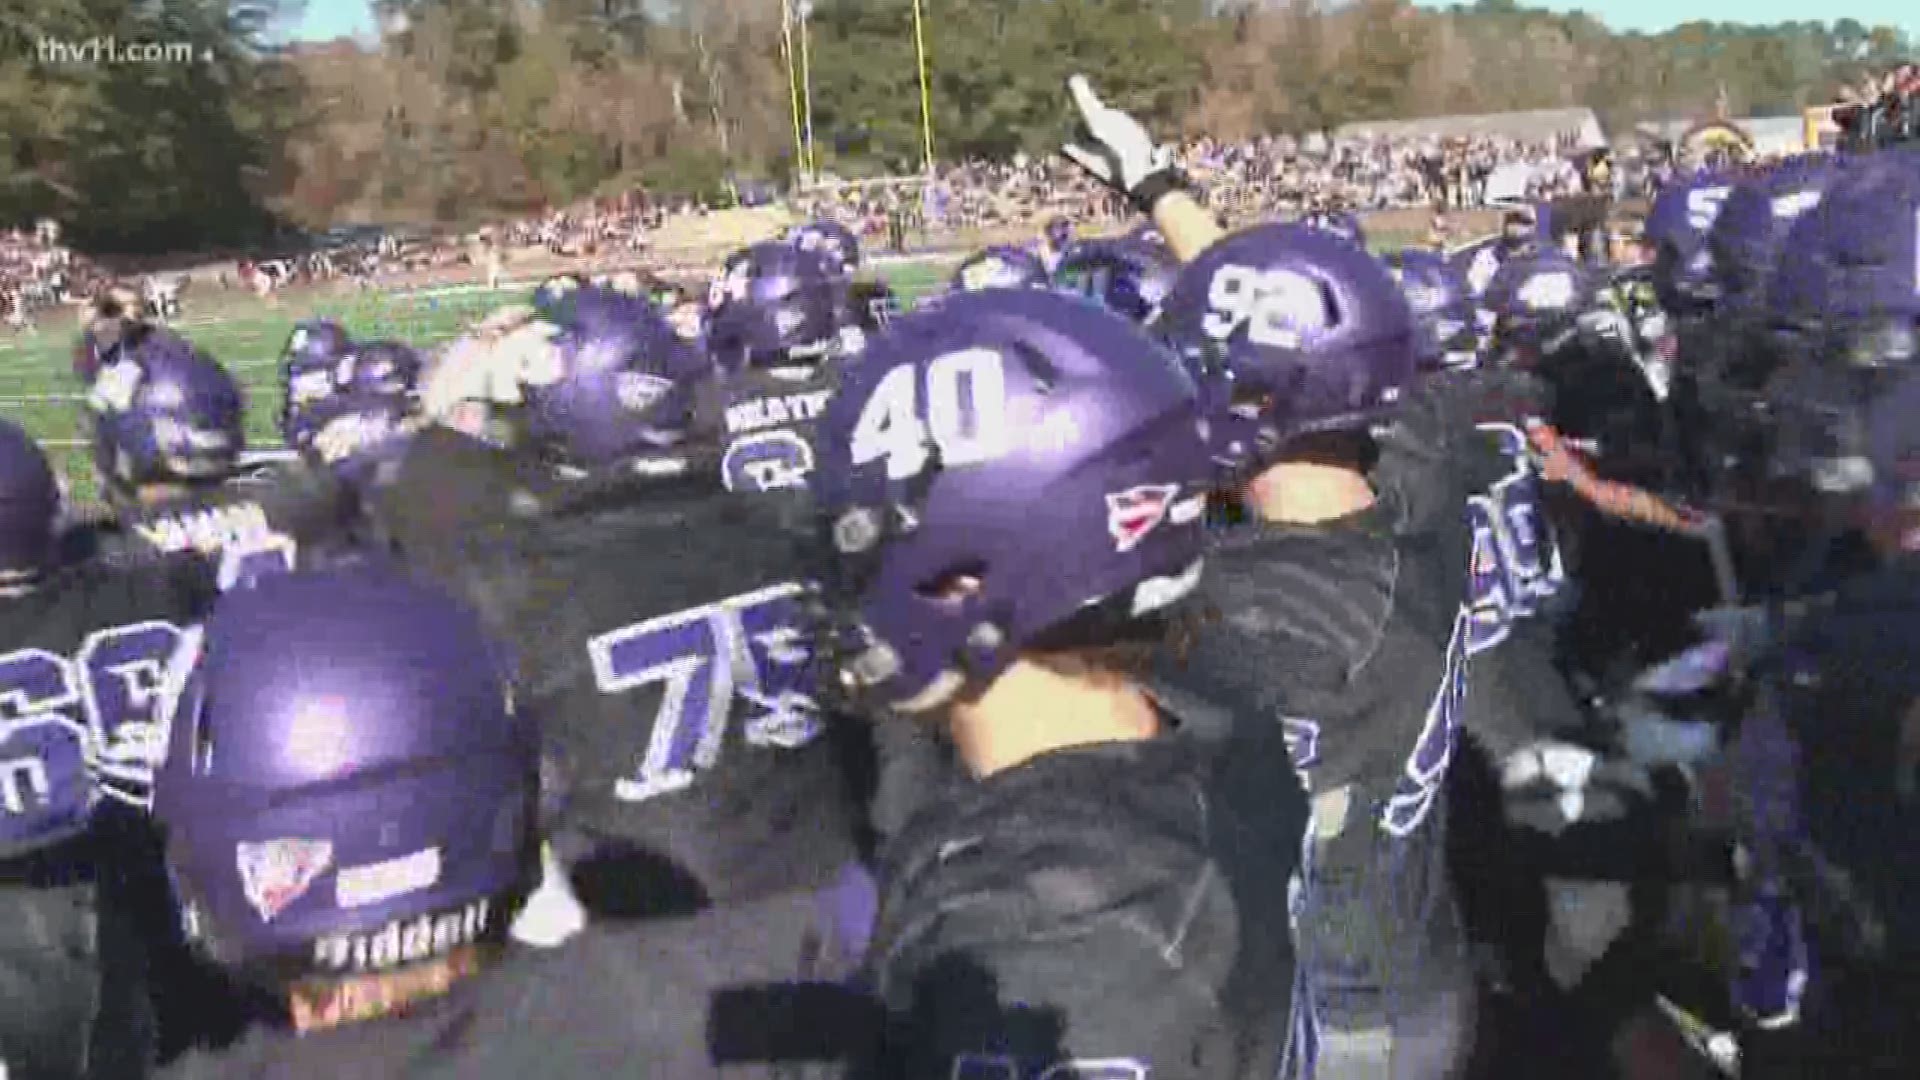 Ouachita Baptist wins Battle of the Ravine to claim outright GAC title